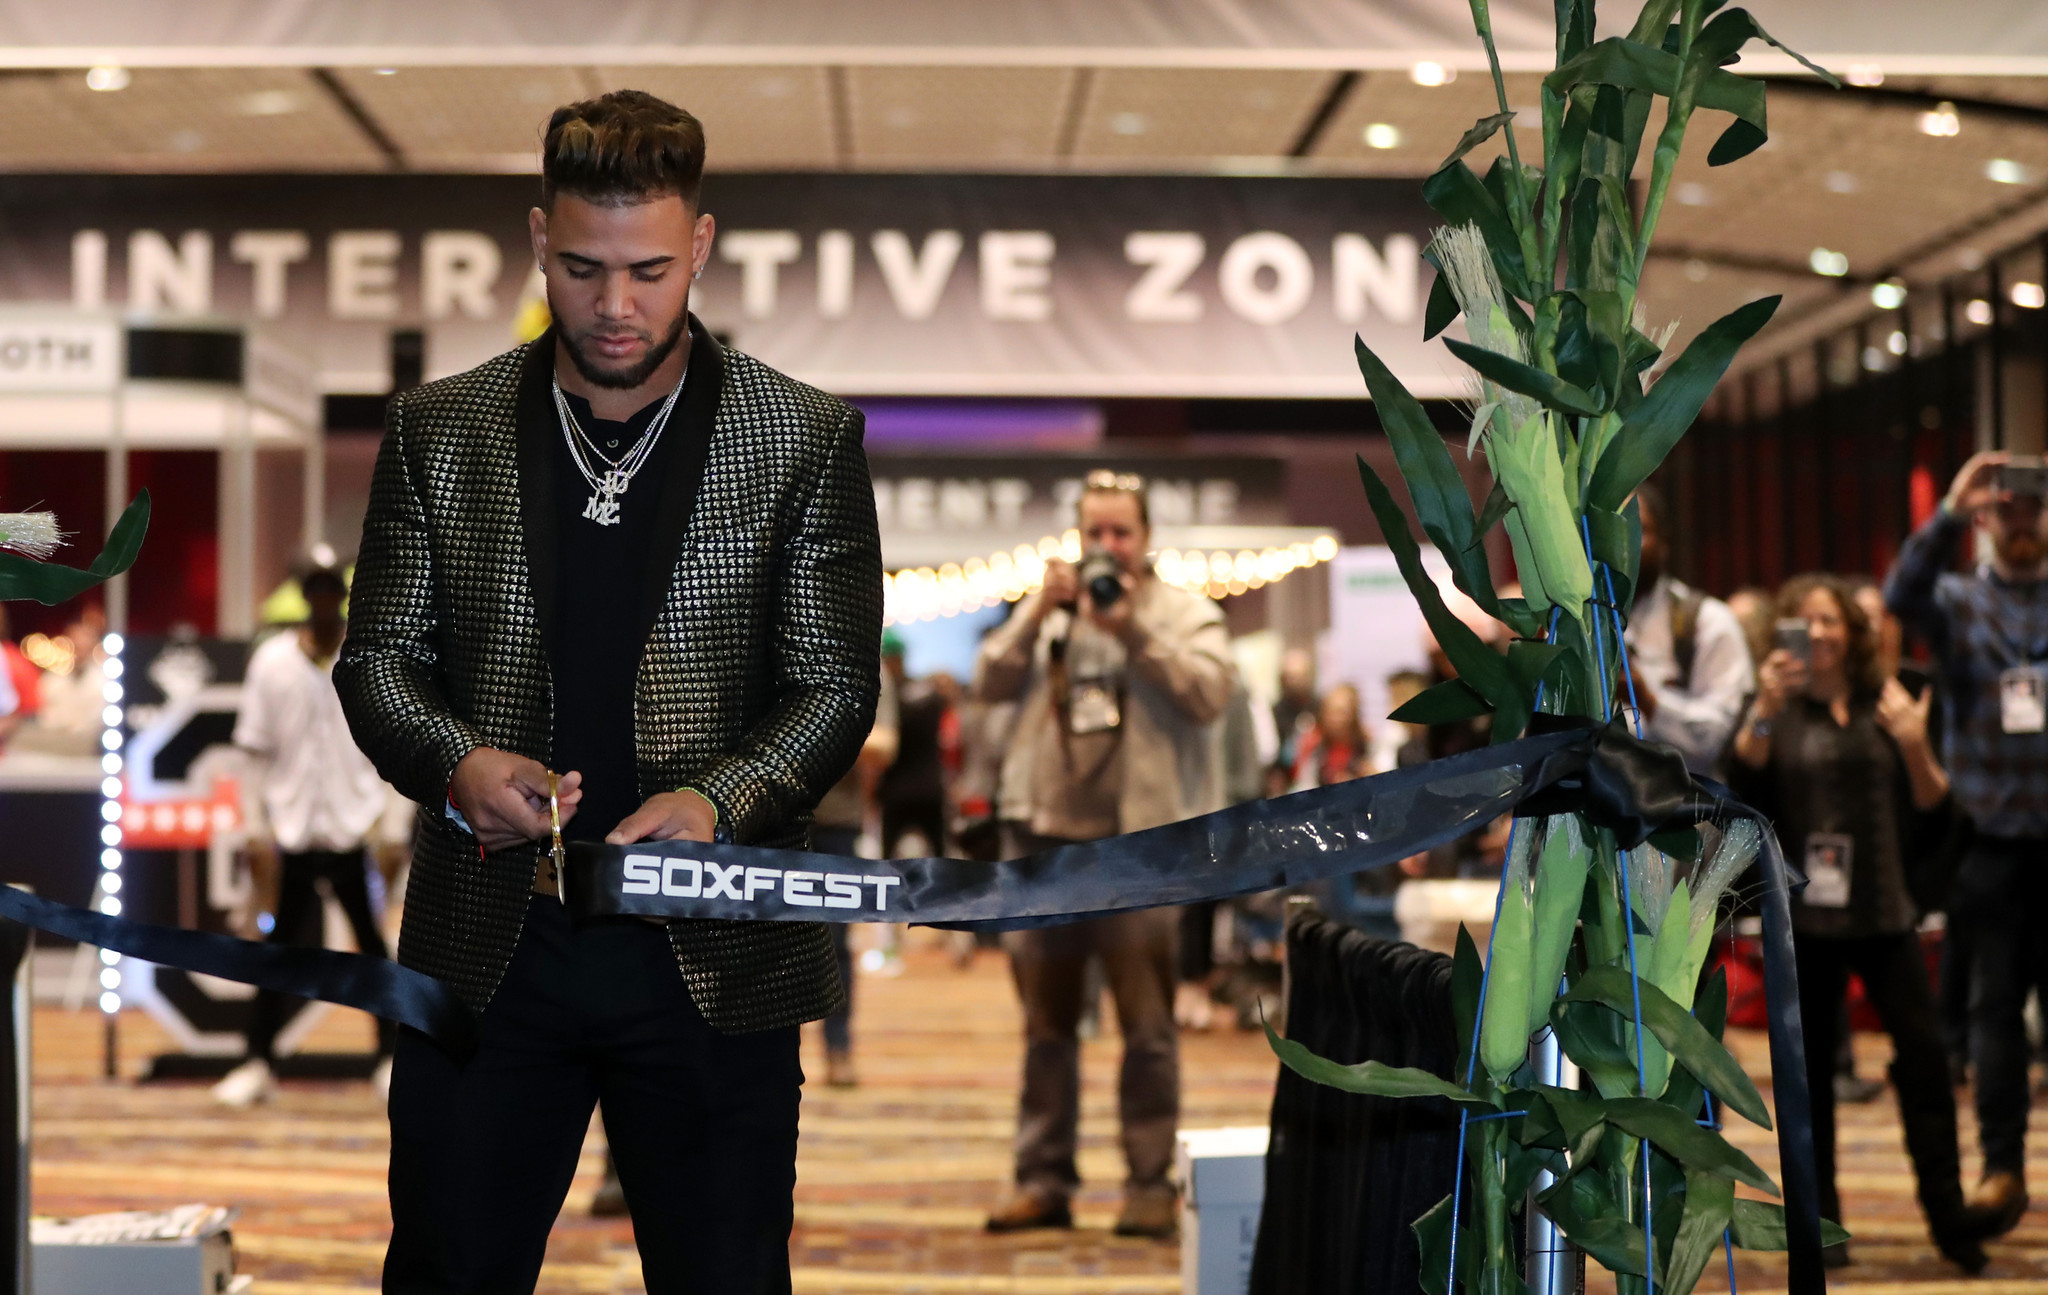 White Sox cancel SoxFest fan convention for 2023 - CBS Chicago